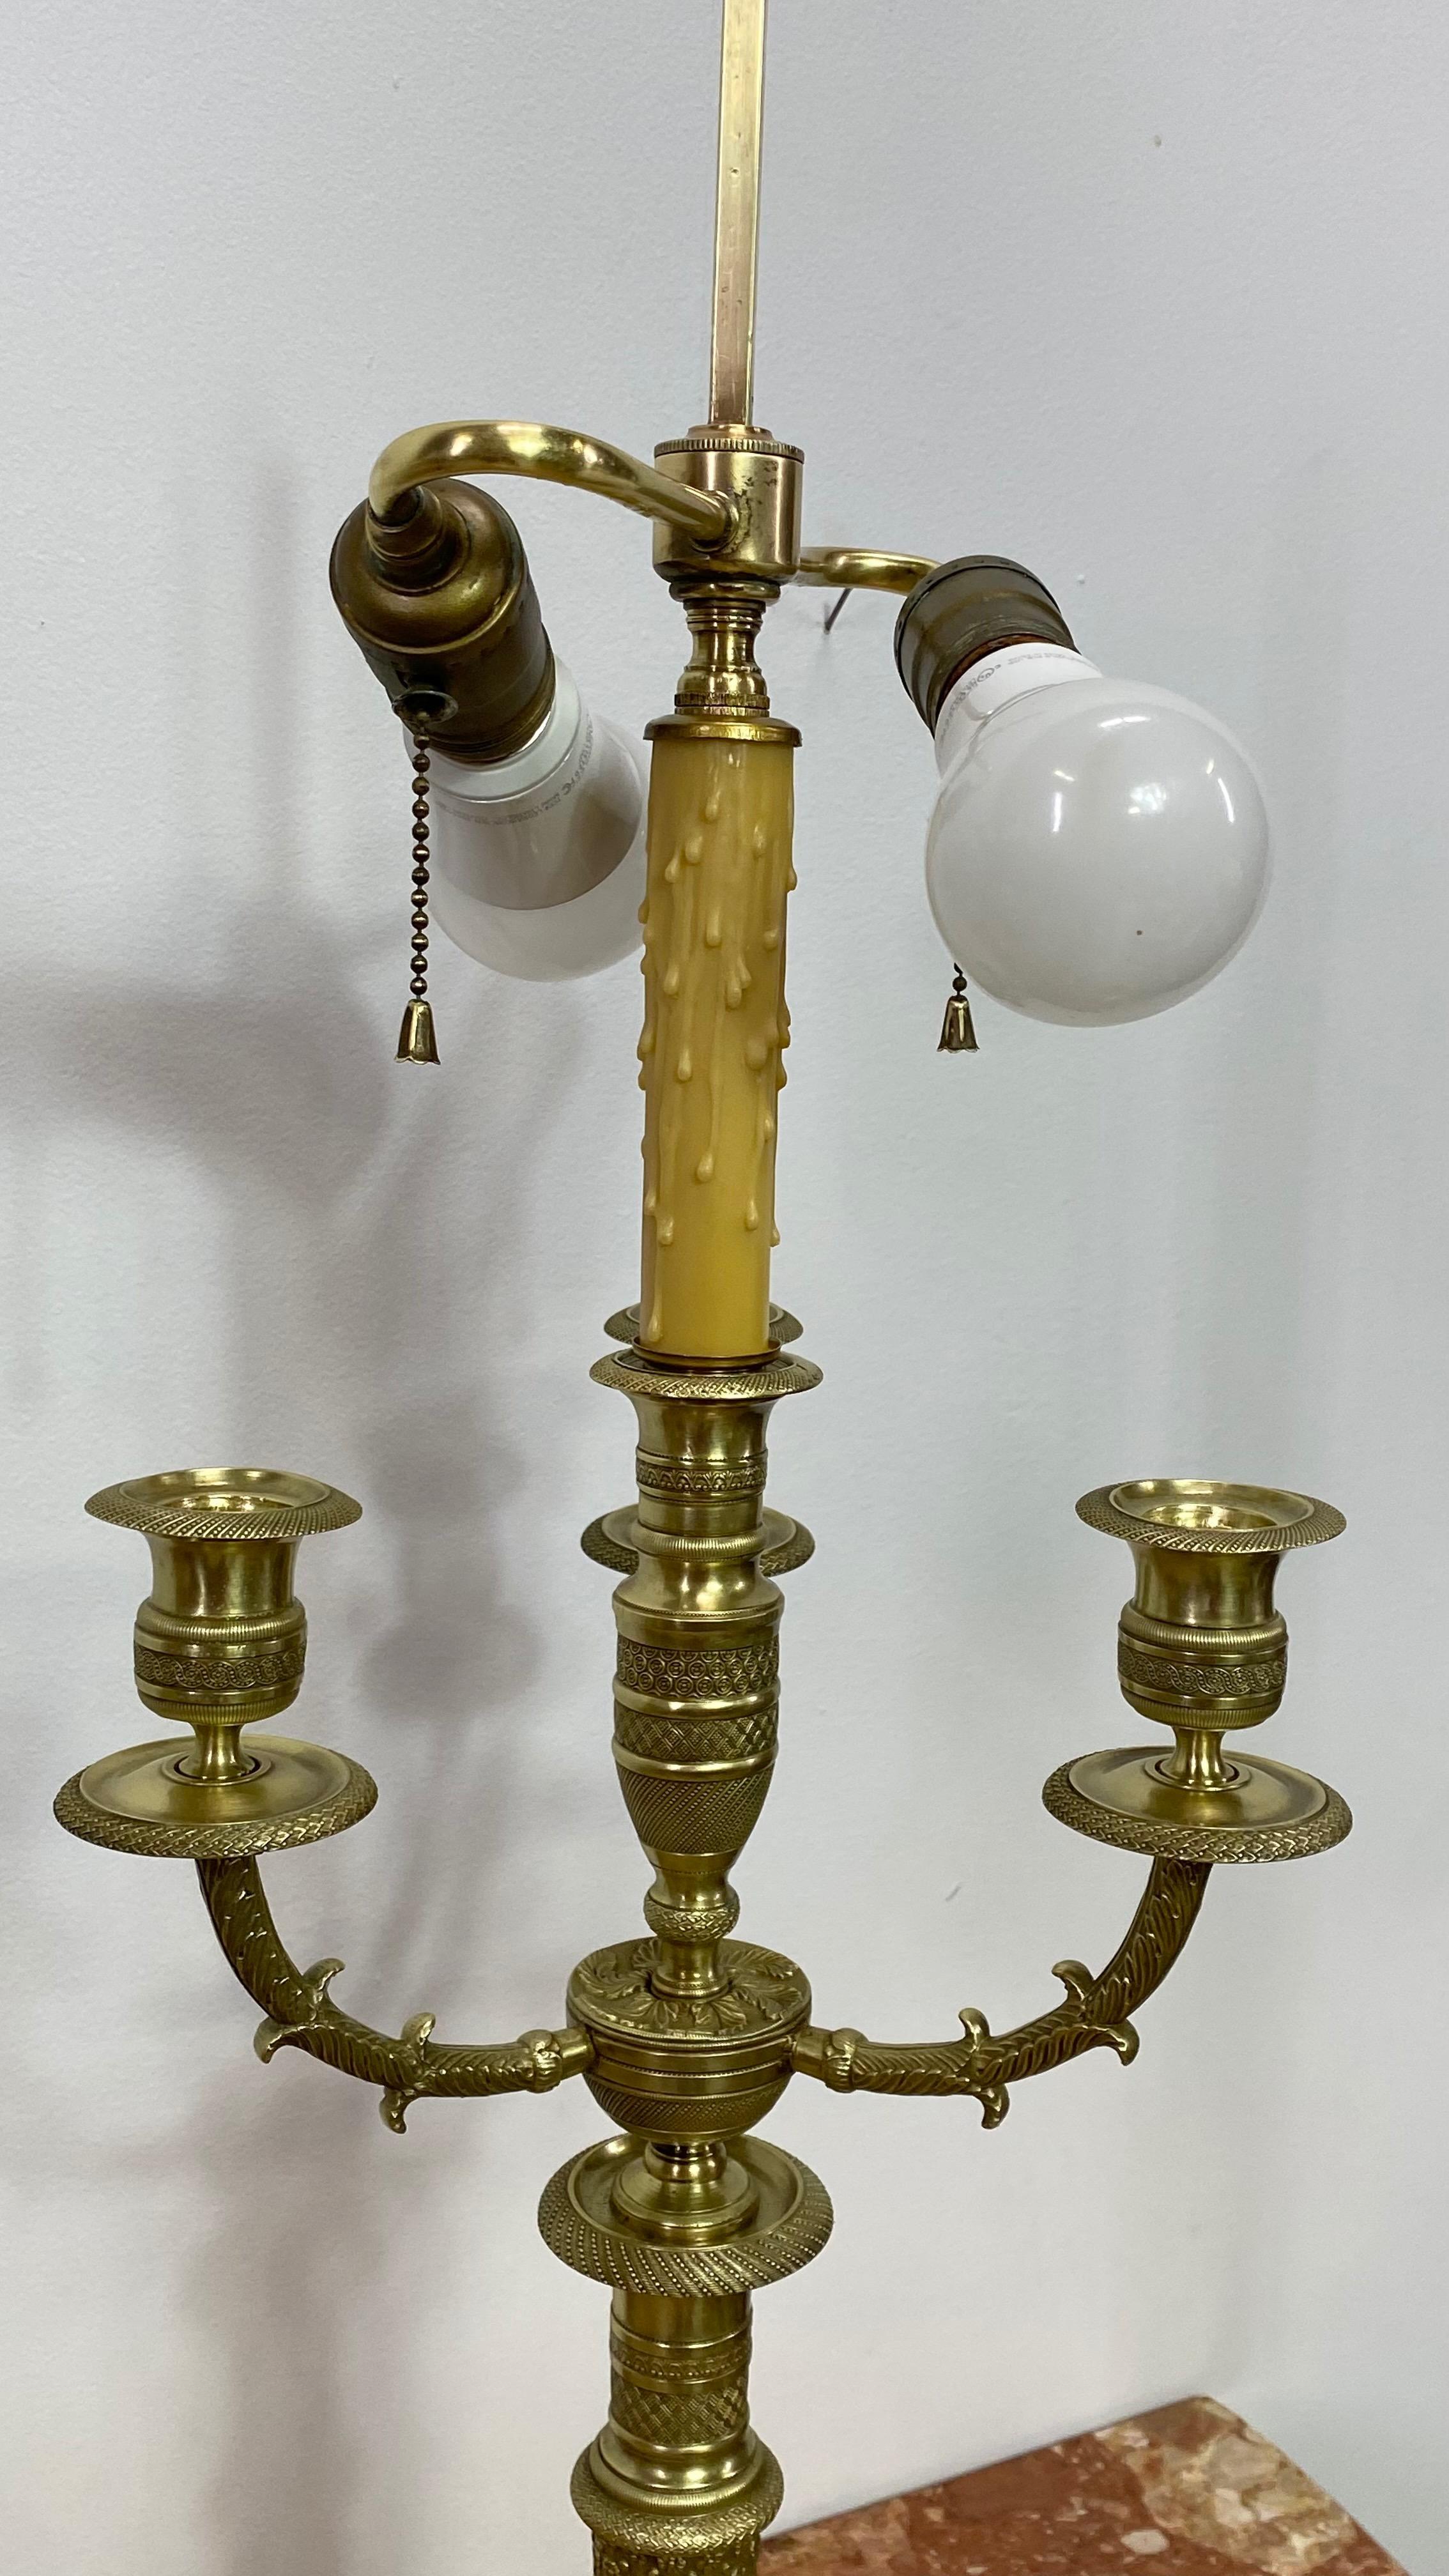 Pair of French Empire Brass Candelabra Lamps, 19th Century For Sale 5